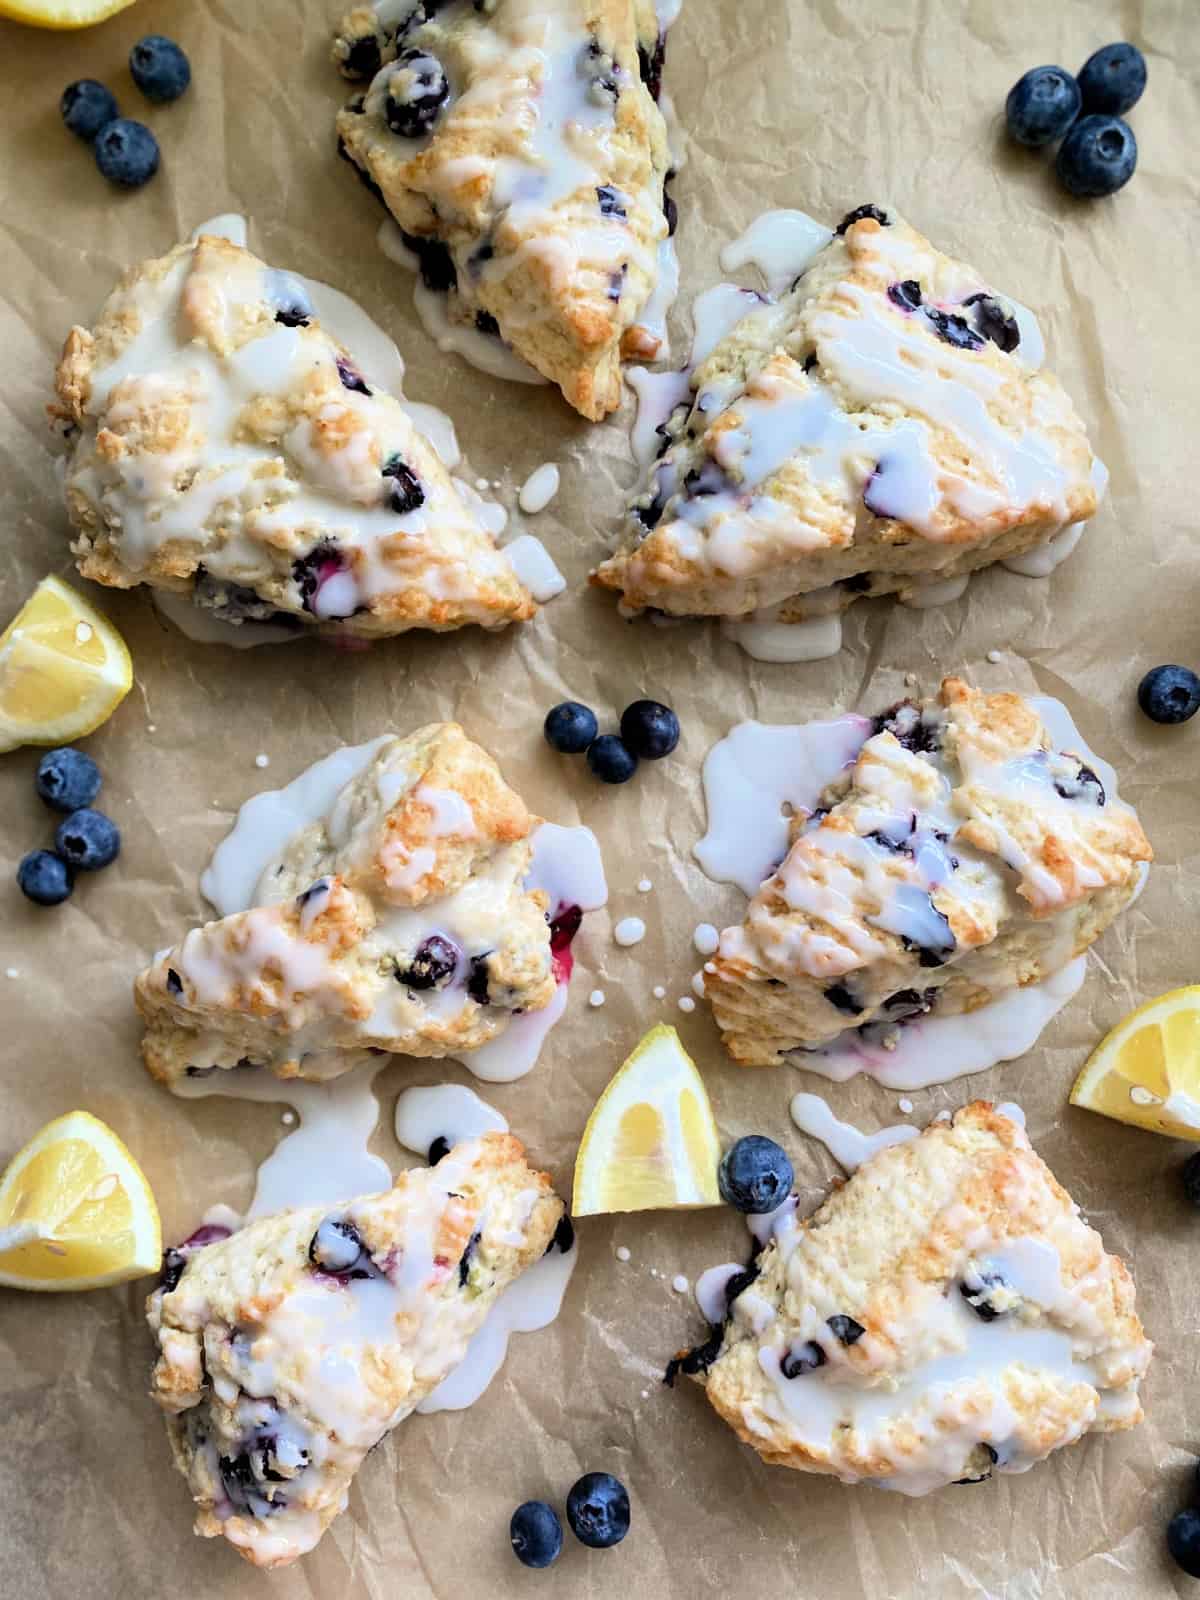 7 scones on brown paper with blueberries and lemon wedges.